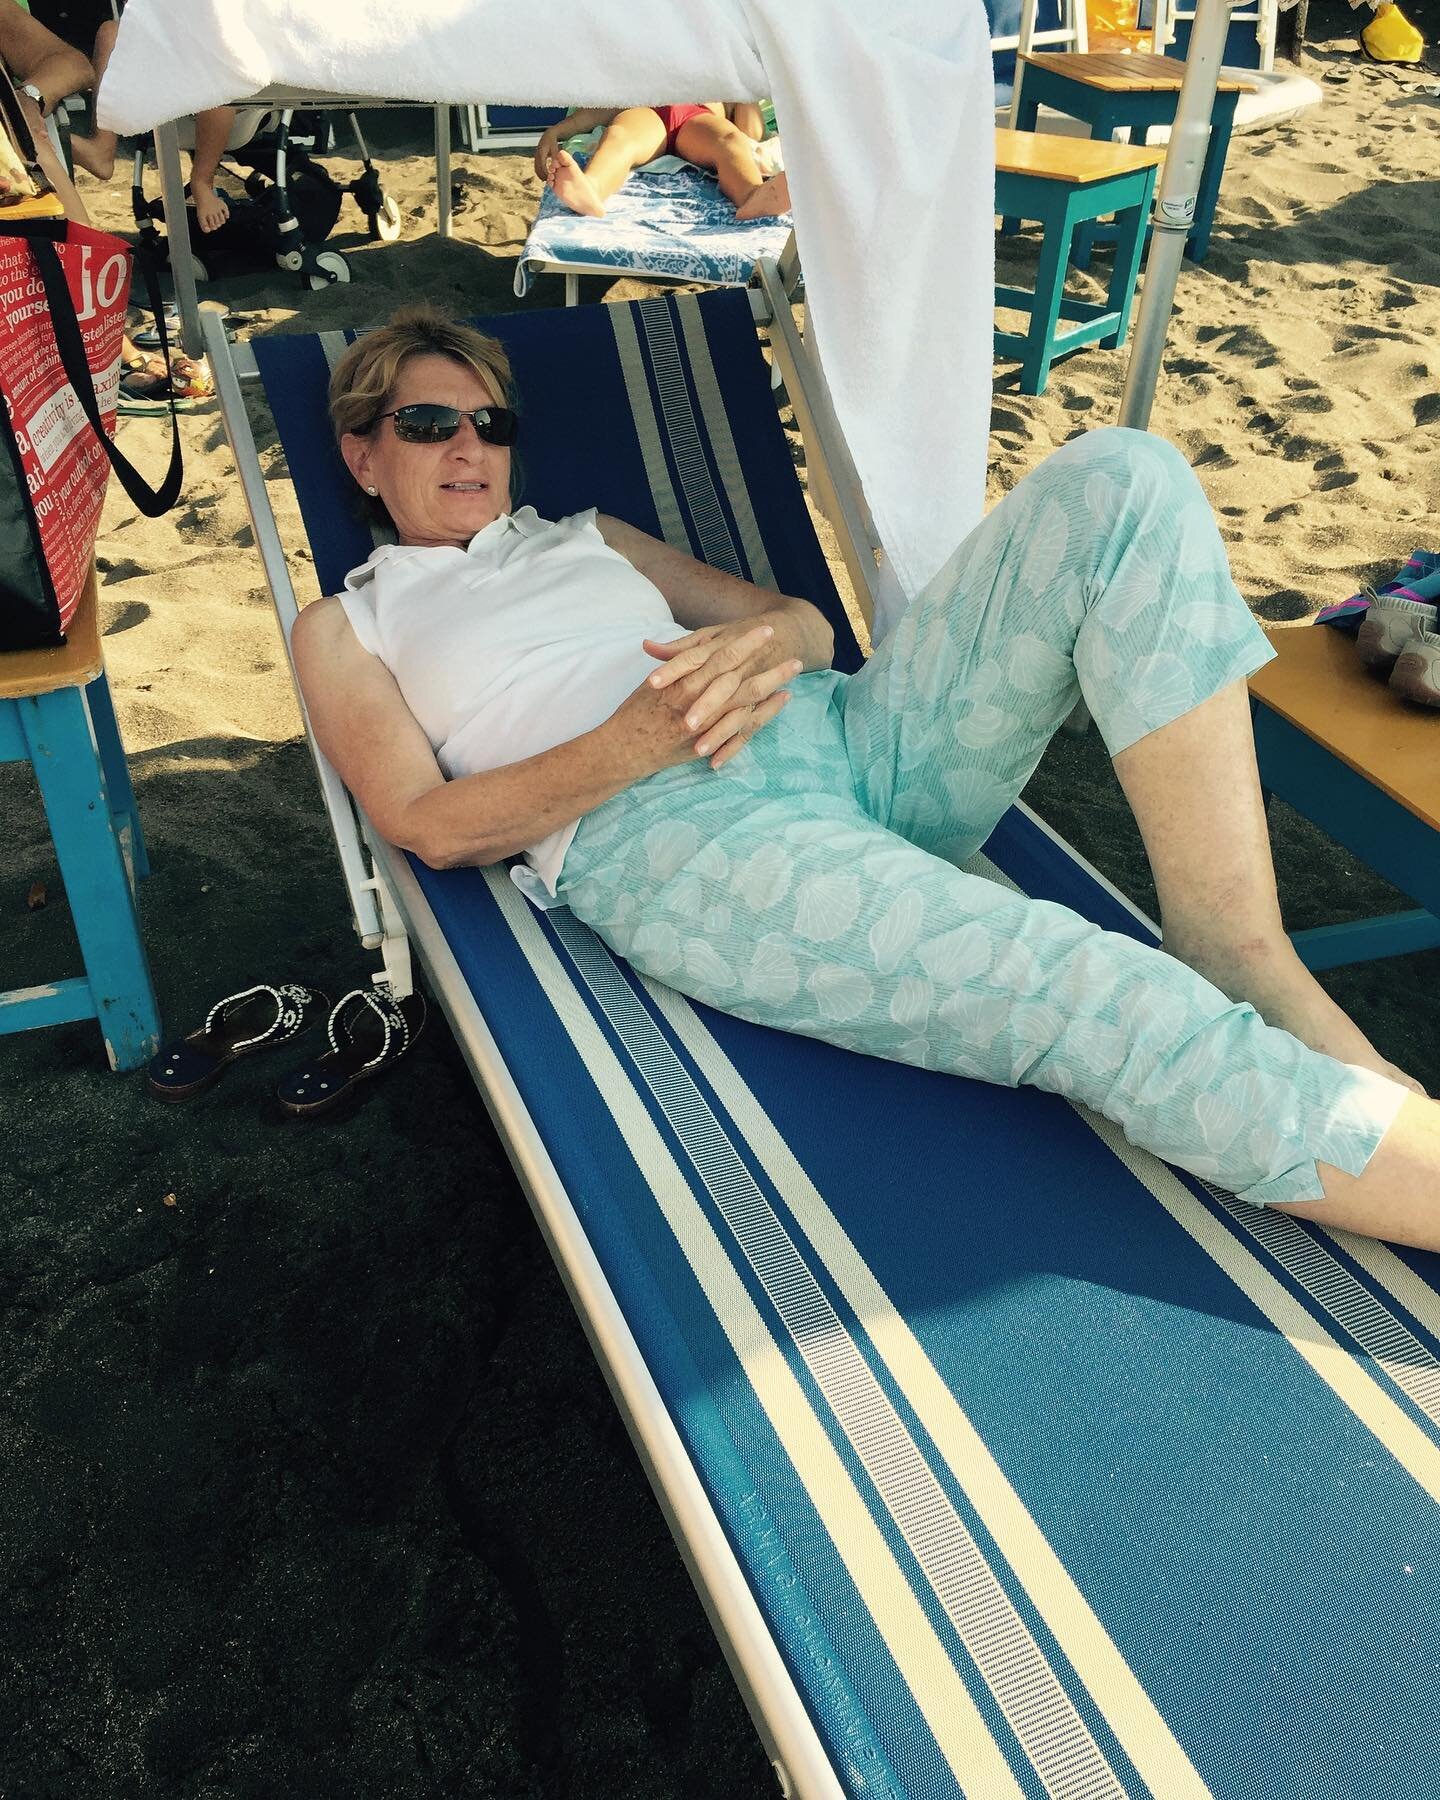 Happy Mother&rsquo;s Day to my mom, whom I miss so much. This is how I like to think of her, loafing on a beach chair in Sorrento in Lilly Pulitzer pants, not giving an f. #mothersday #mother #mom